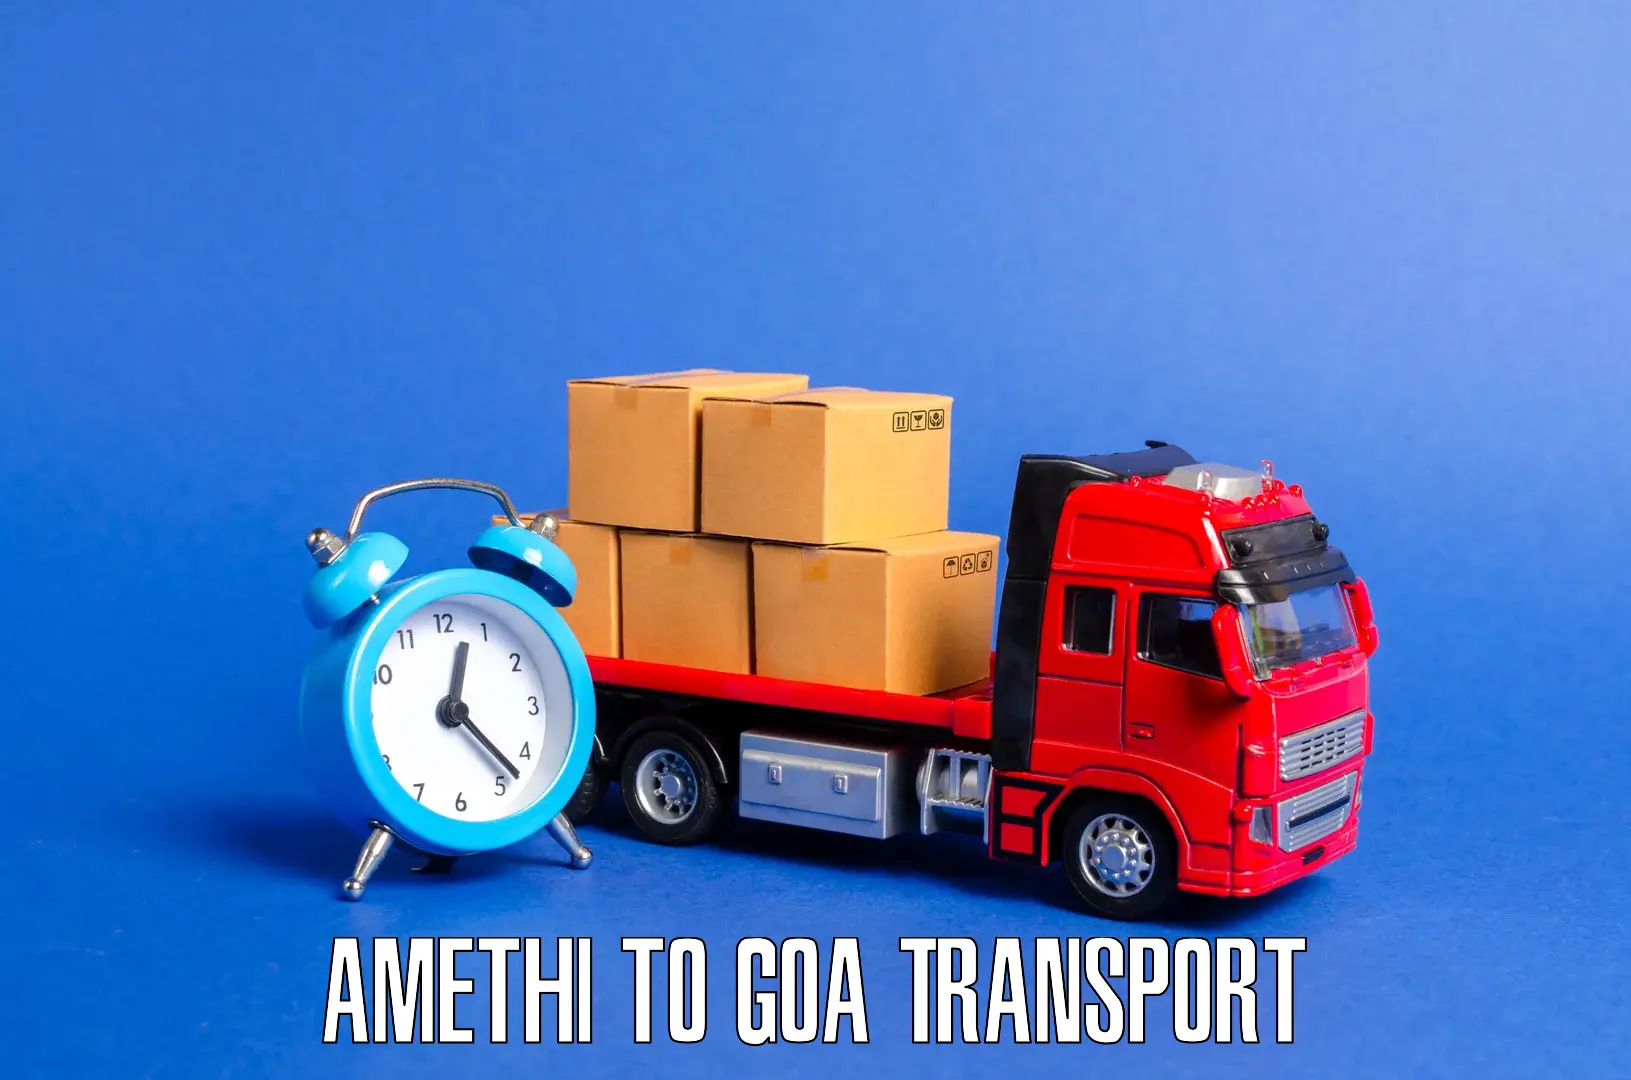 Transport bike from one state to another in Amethi to Vasco da Gama